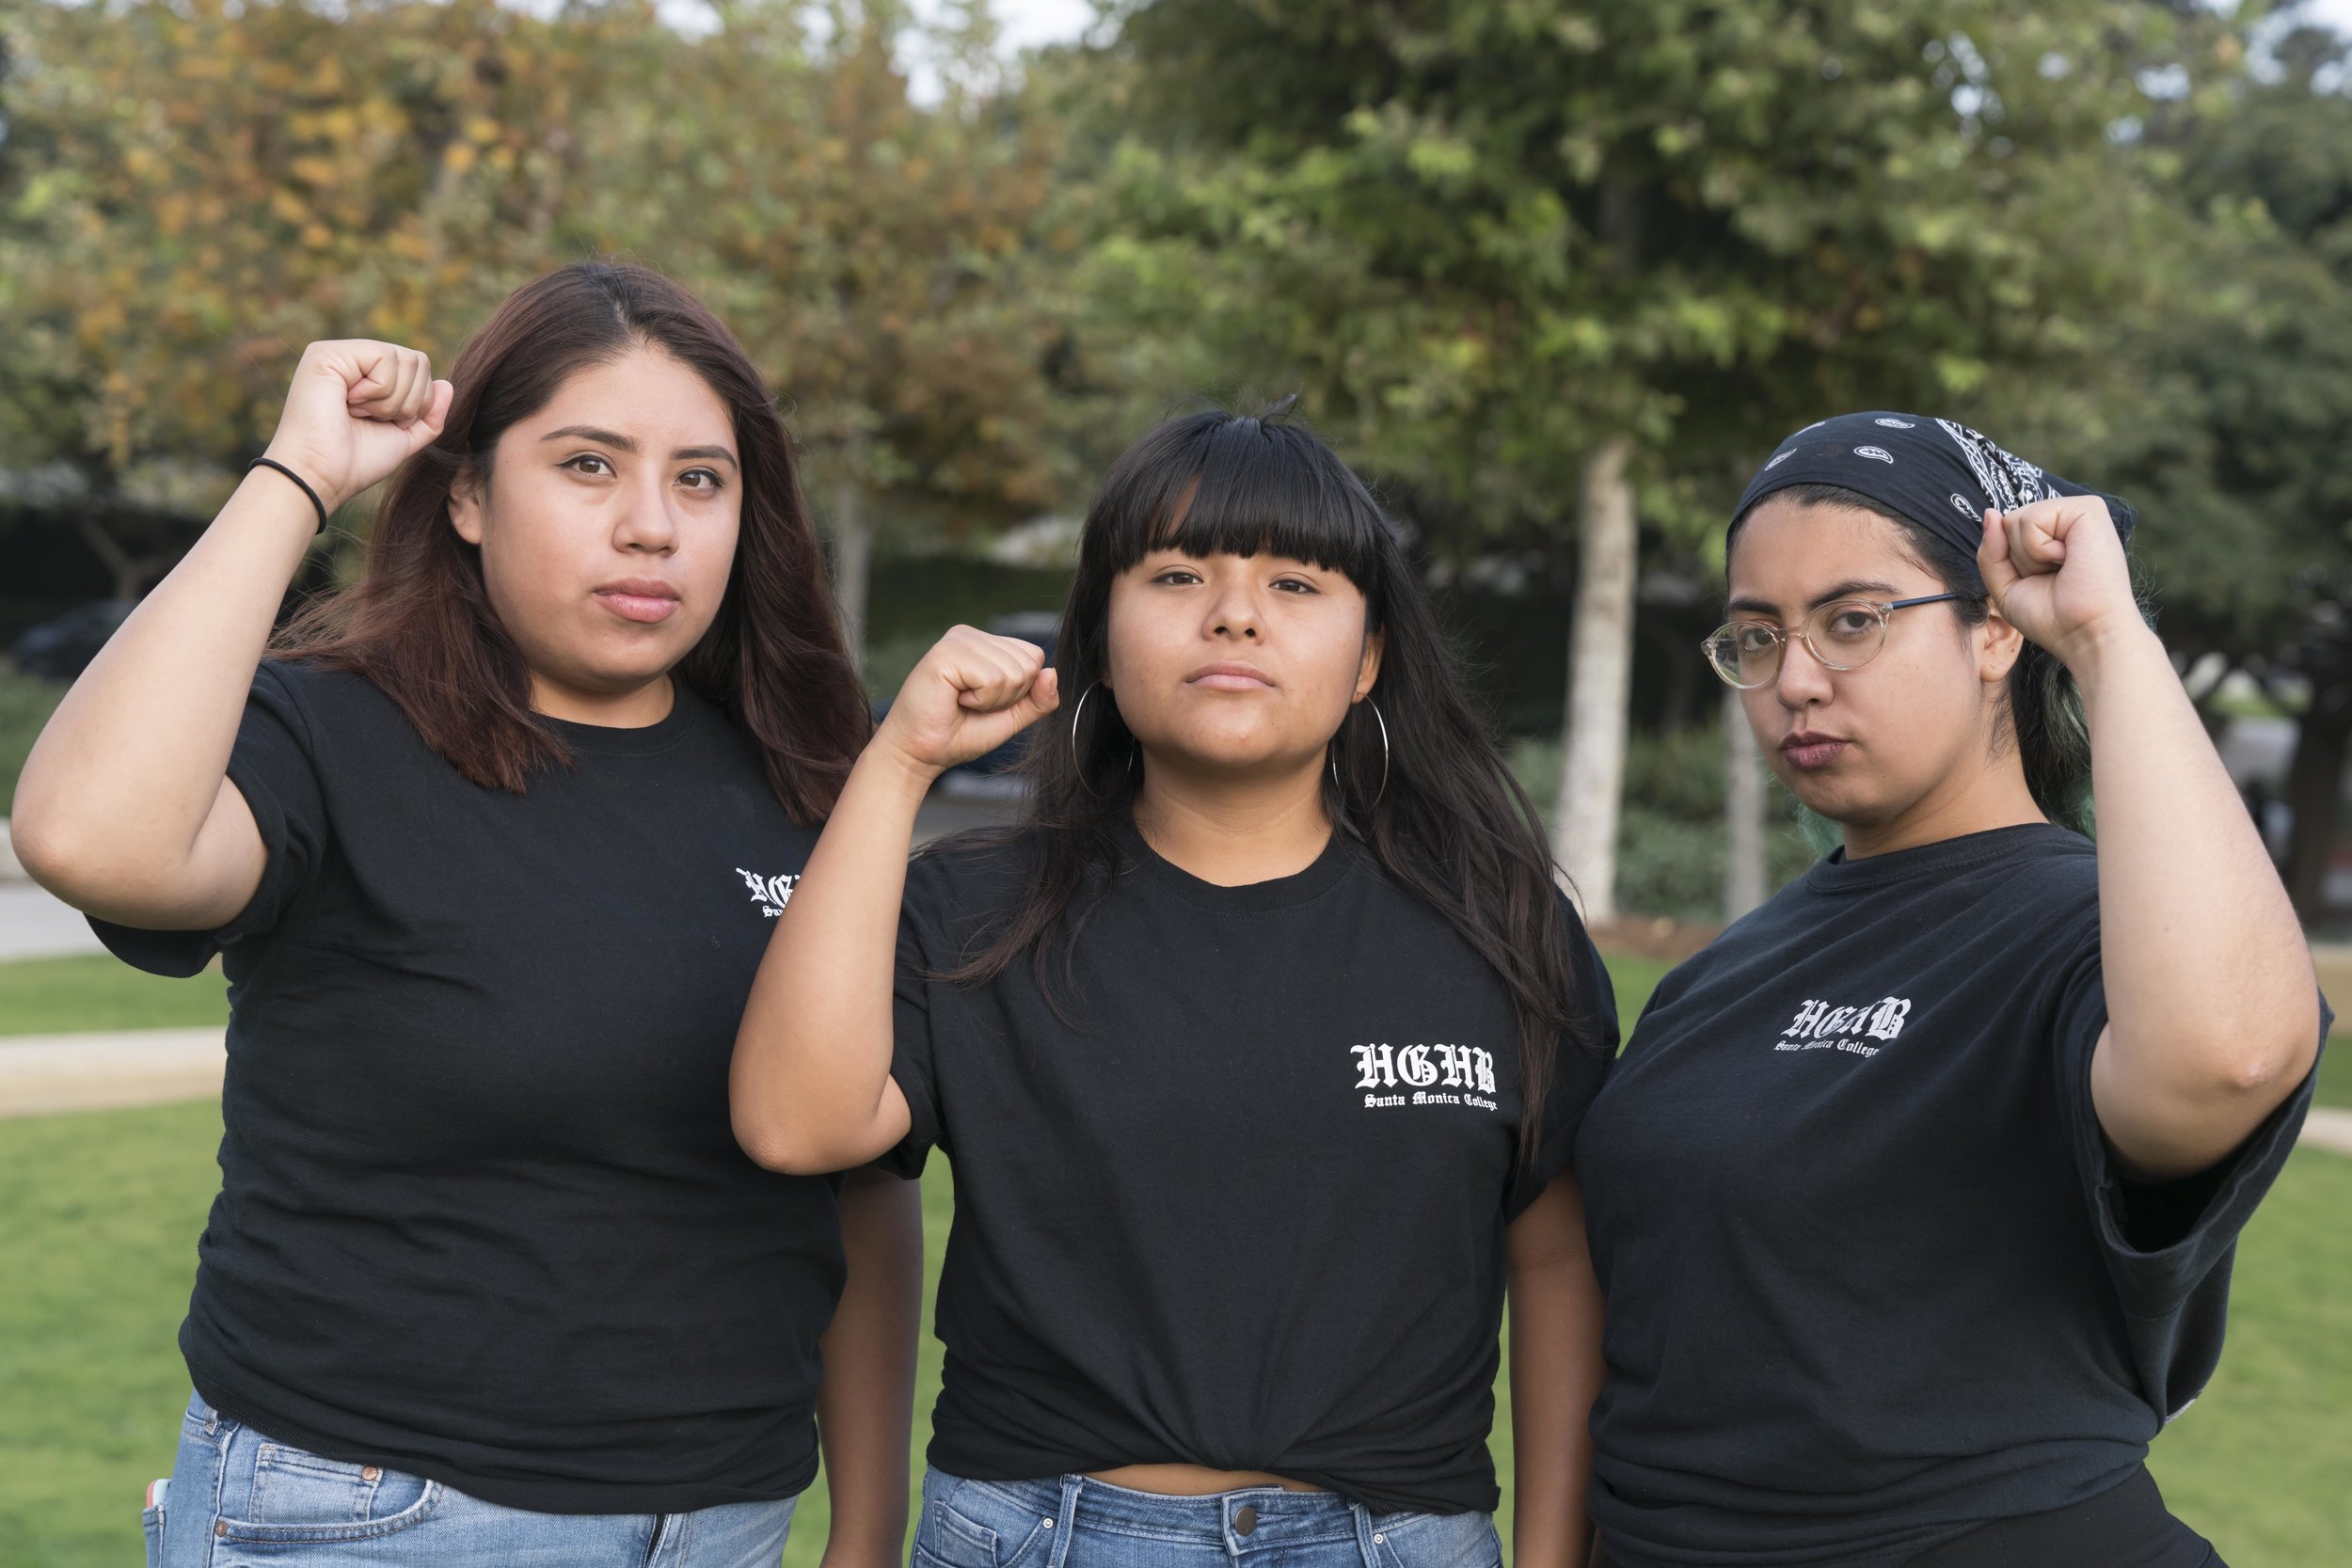  Santa Monica College student and DACA recipient, Salma Aguilar Morales (center), poses for a photograph with fellow student activists, Karina Maximo (left) and Estephanie Guardado (right) in Santa Monica, Calif. on September 11, 2017. Guardado is Pr